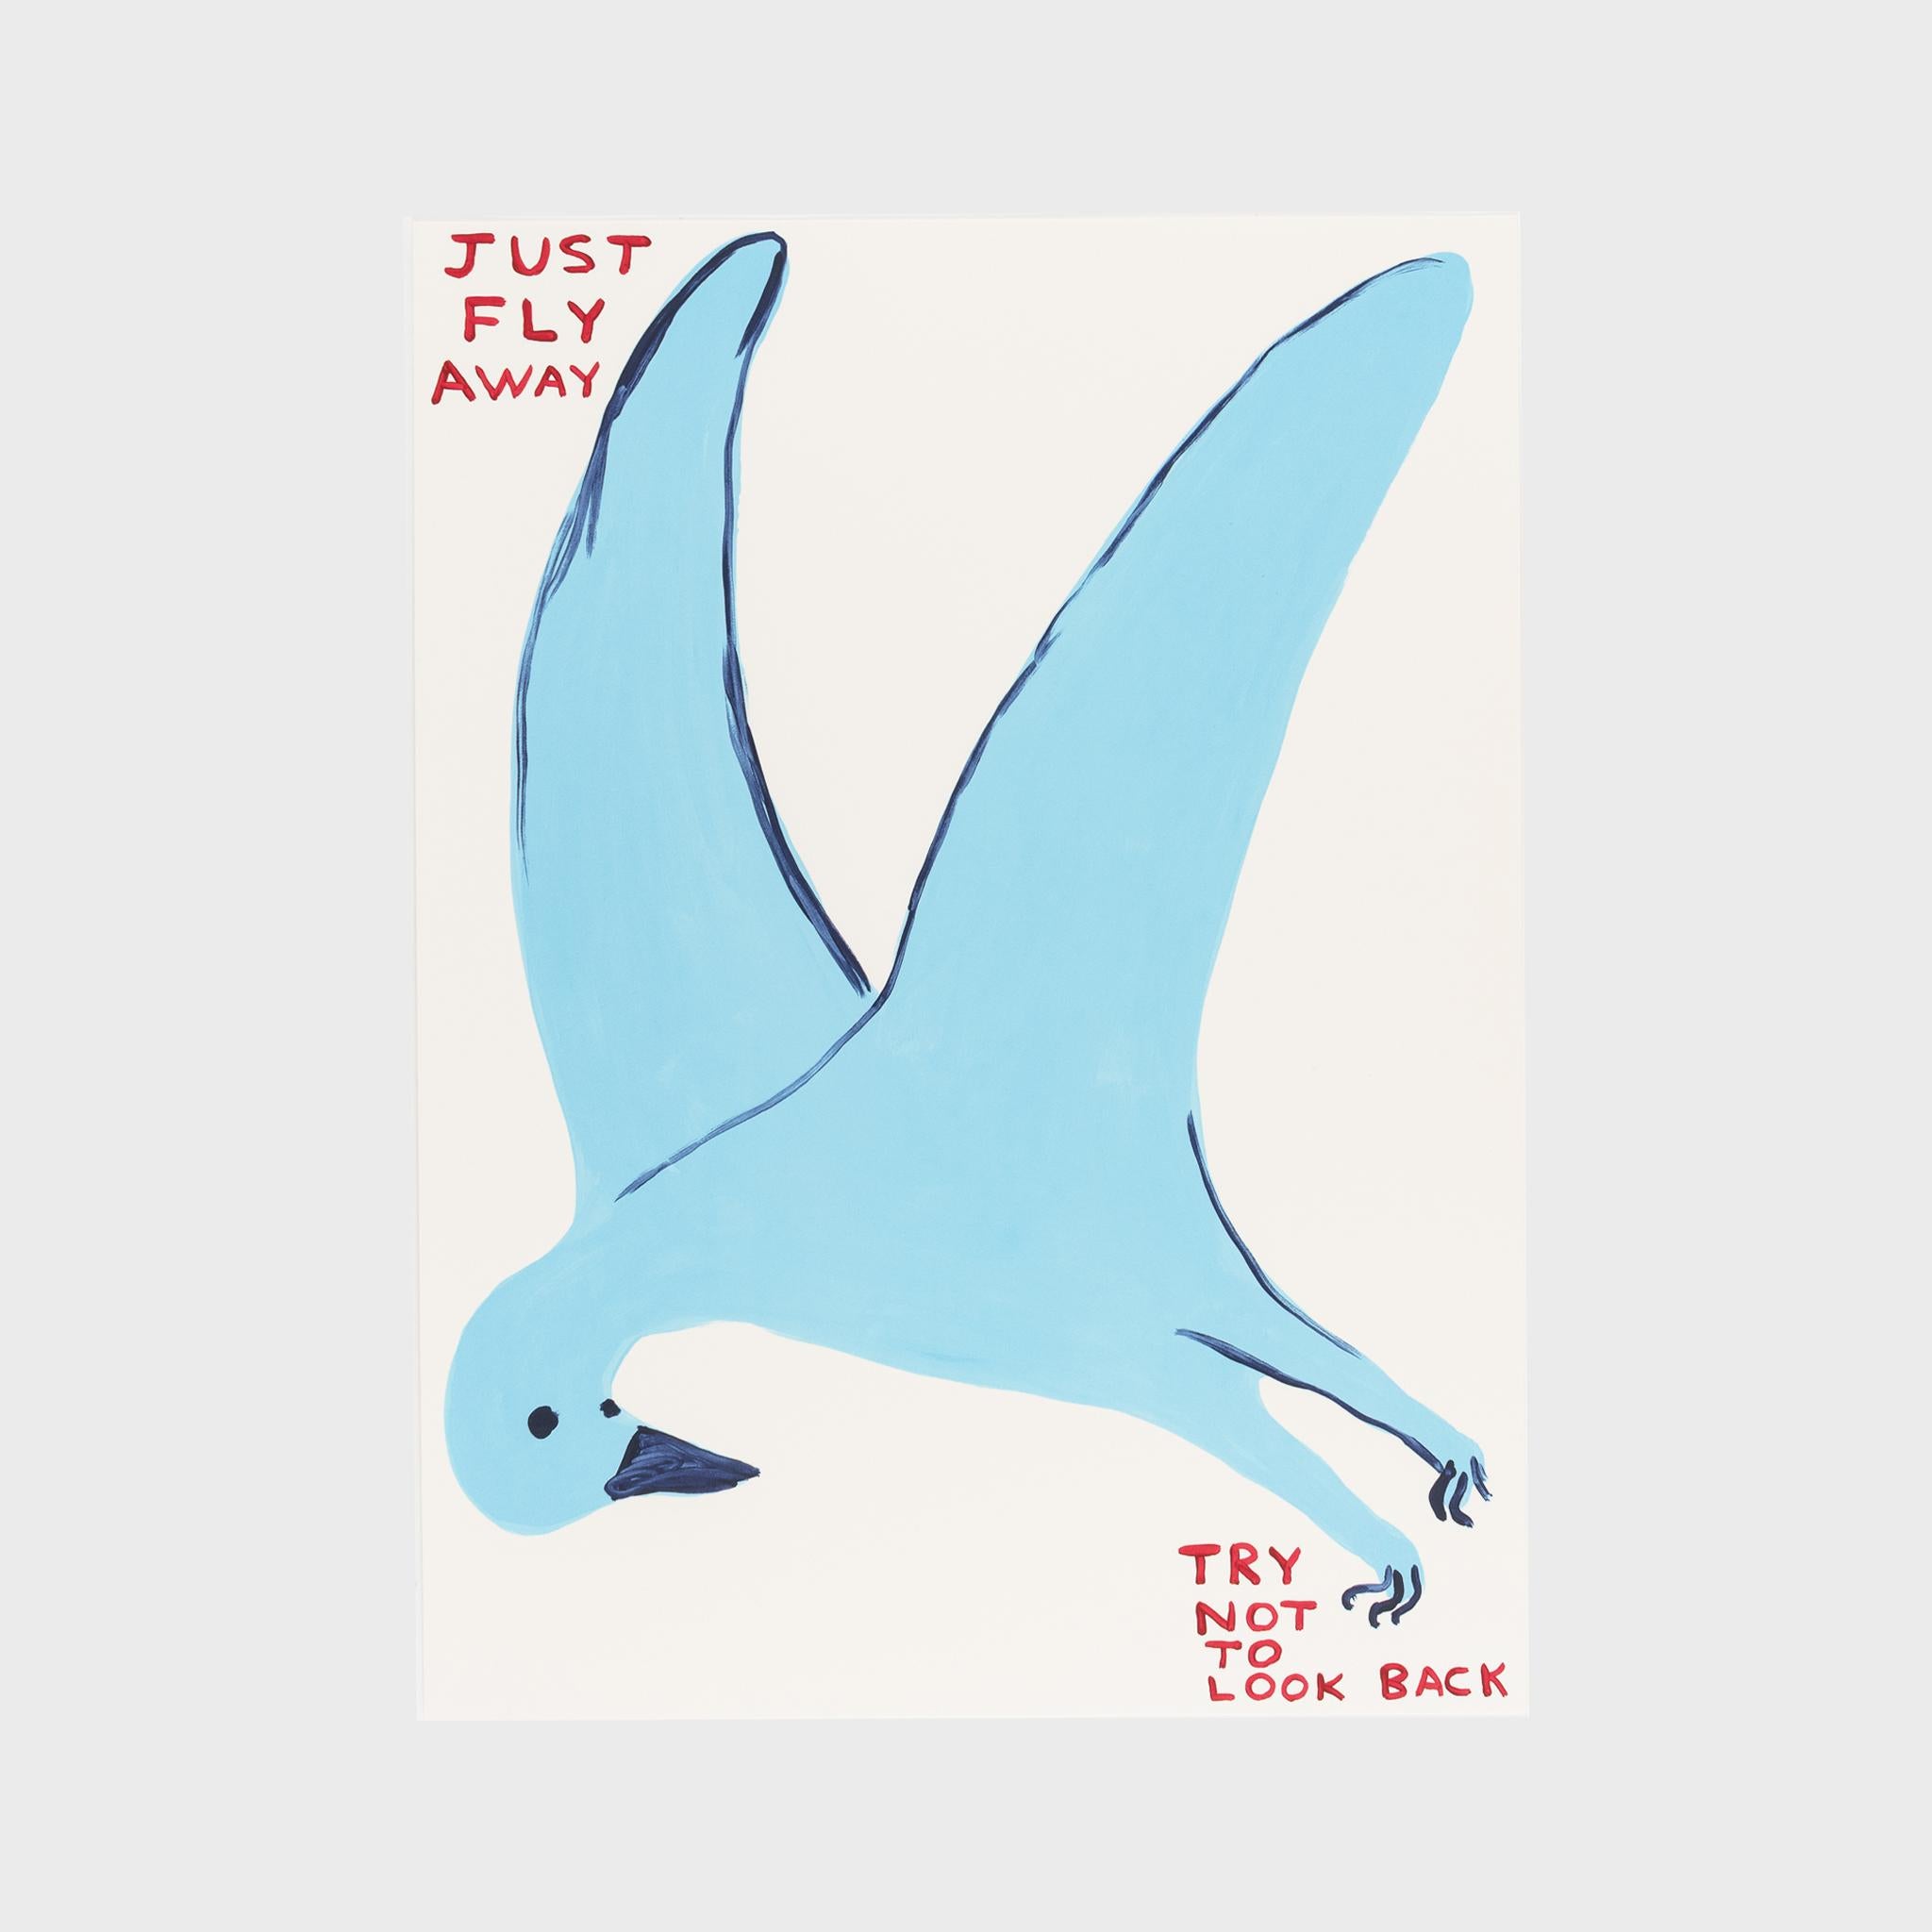 David Shrigley Animal Print - Untitled (Just Fly Away, Try Not To Look Back)